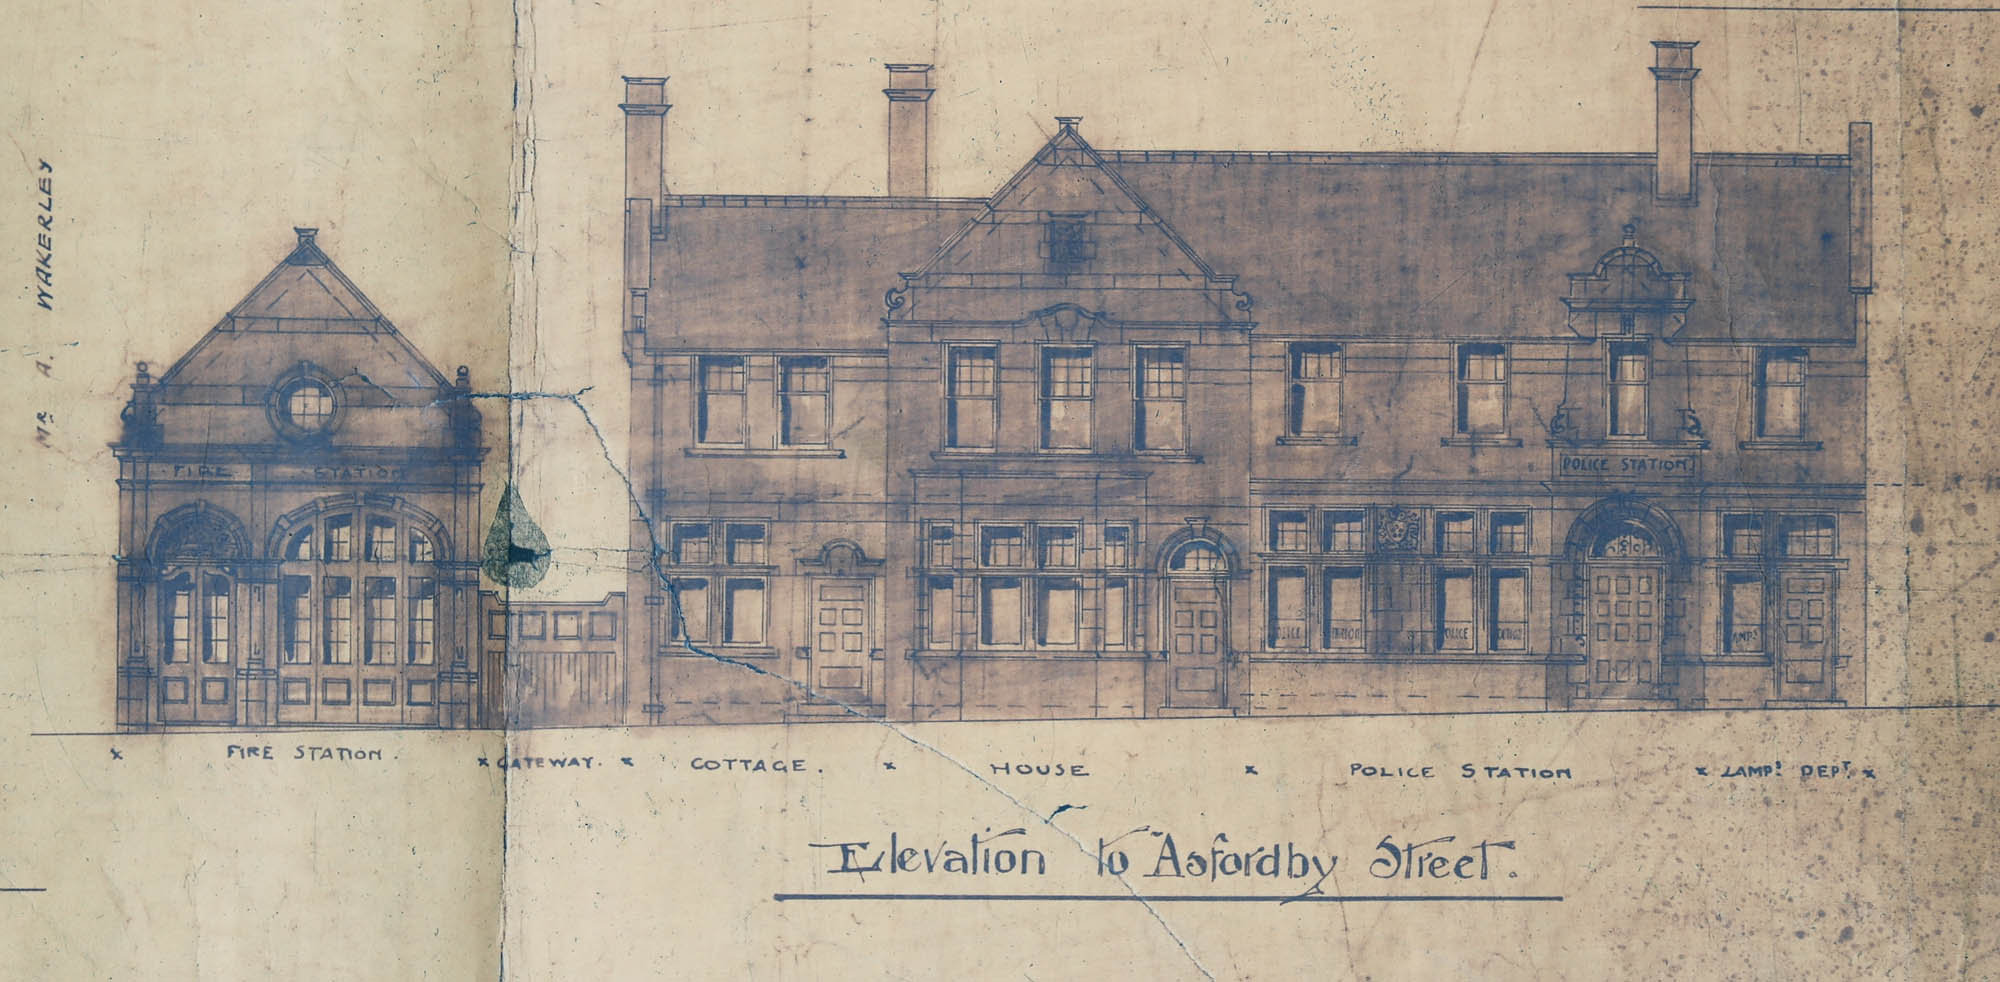 Original plan for the fire and police station - Leicestershire, Leicester and Rutland Record Office